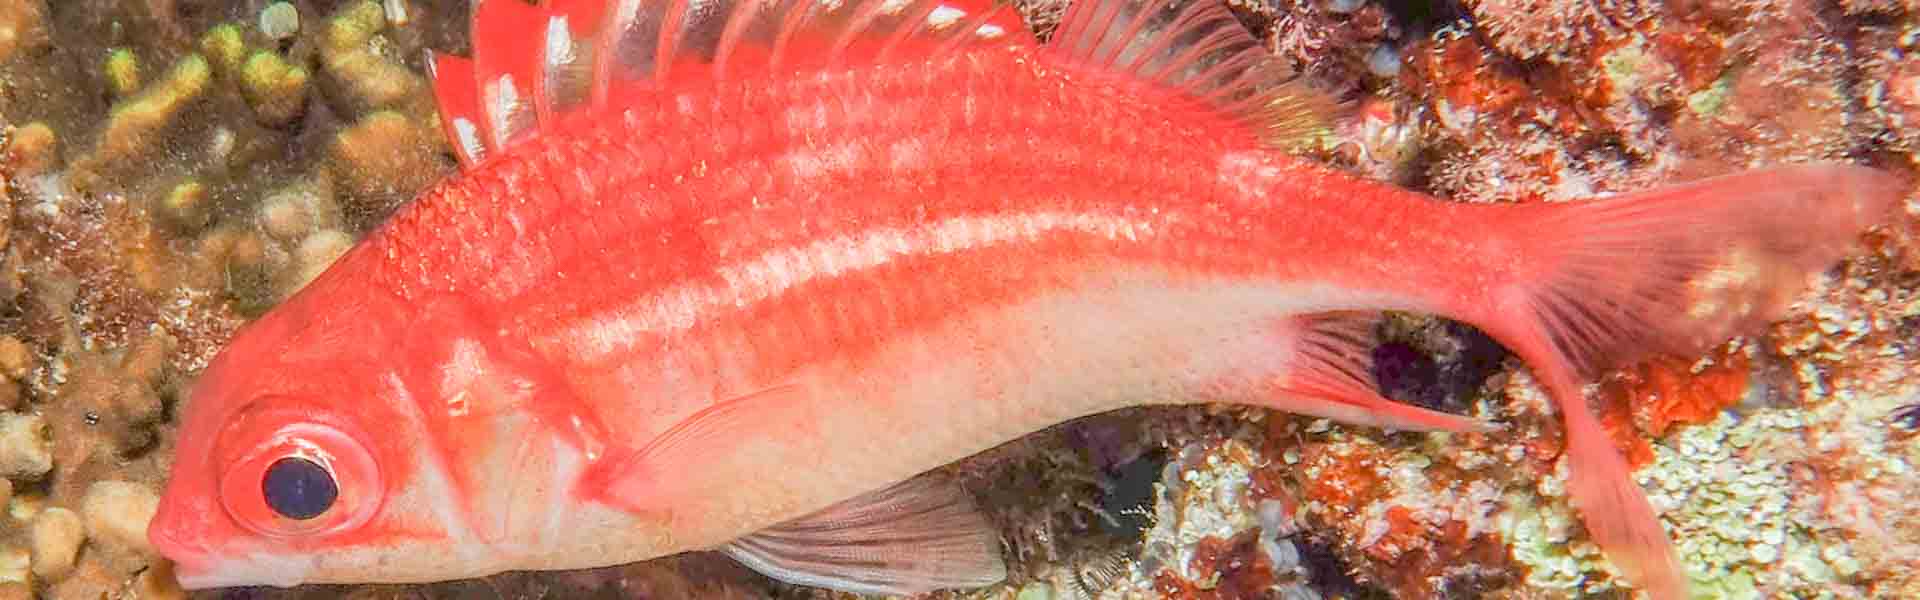 The Peppered Squirrelfish